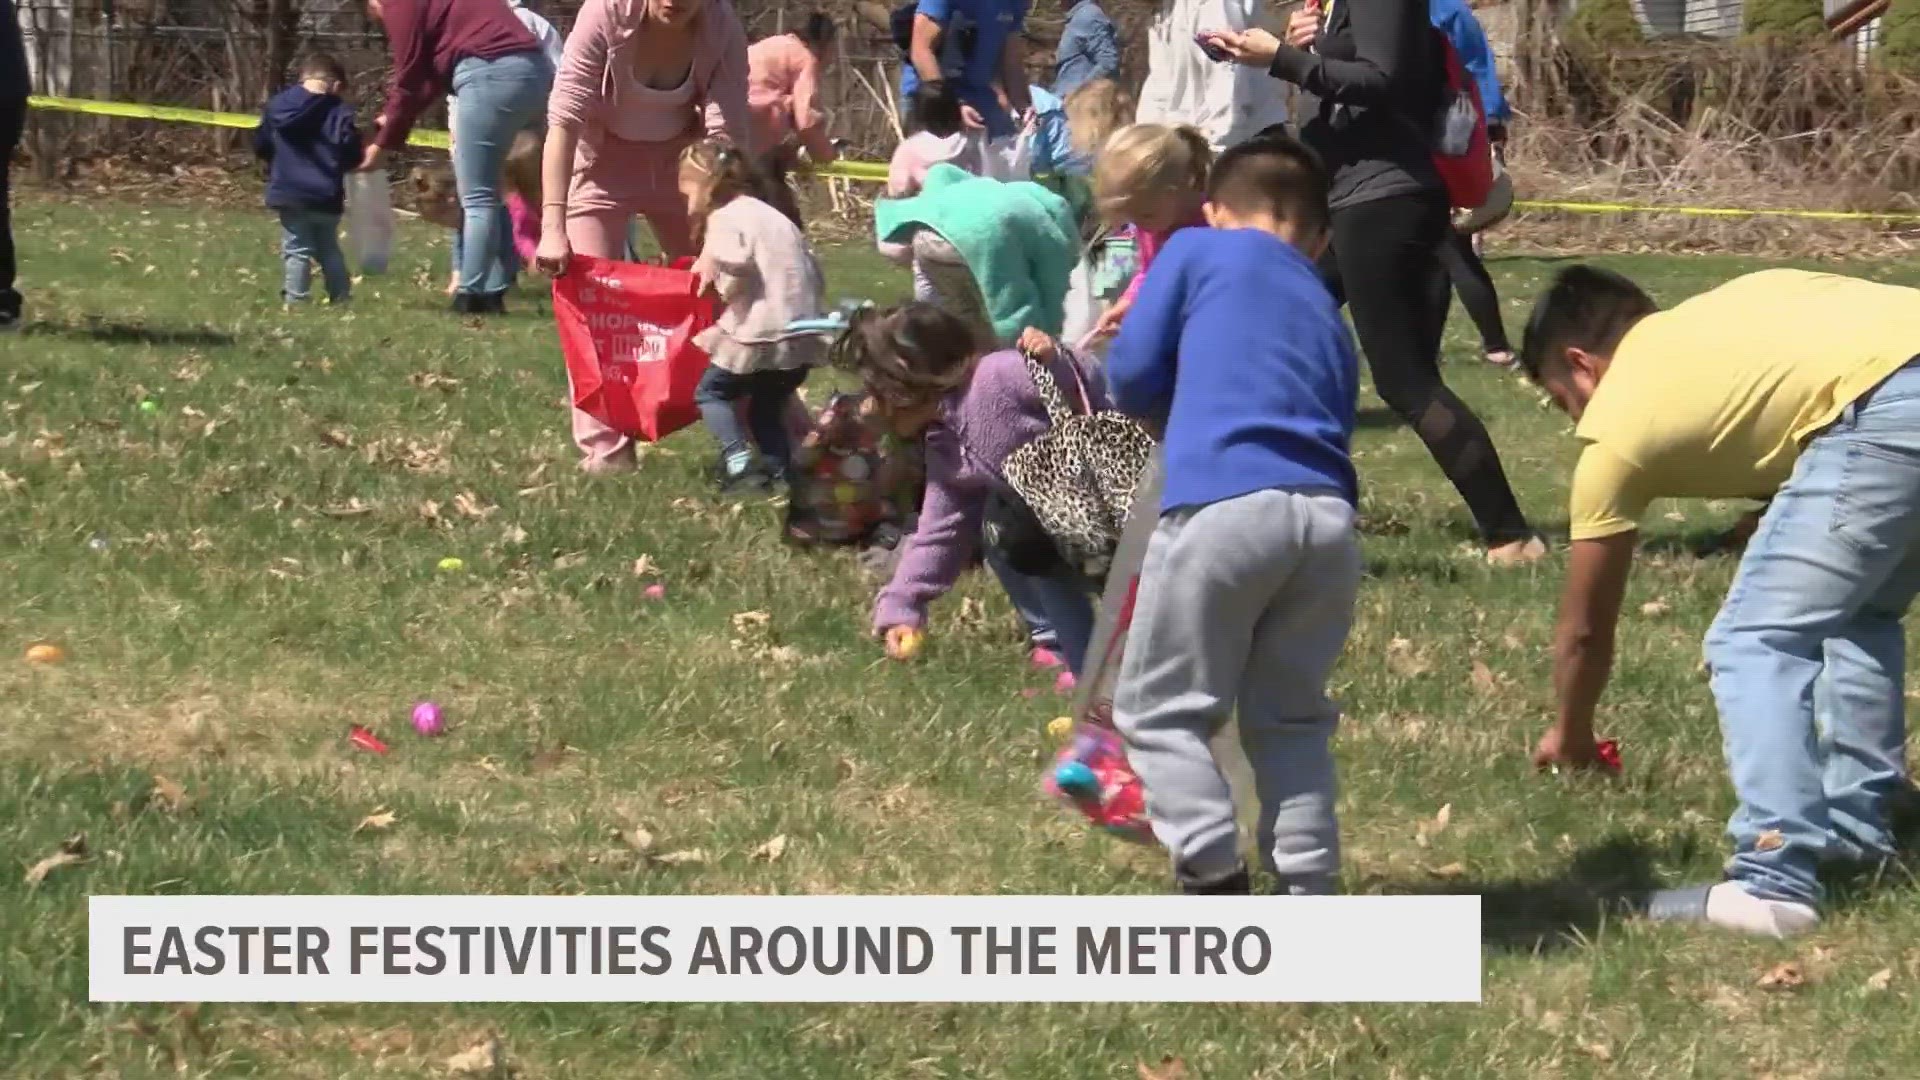 Des Moines was "hopping" with festivities throughout the weekend.